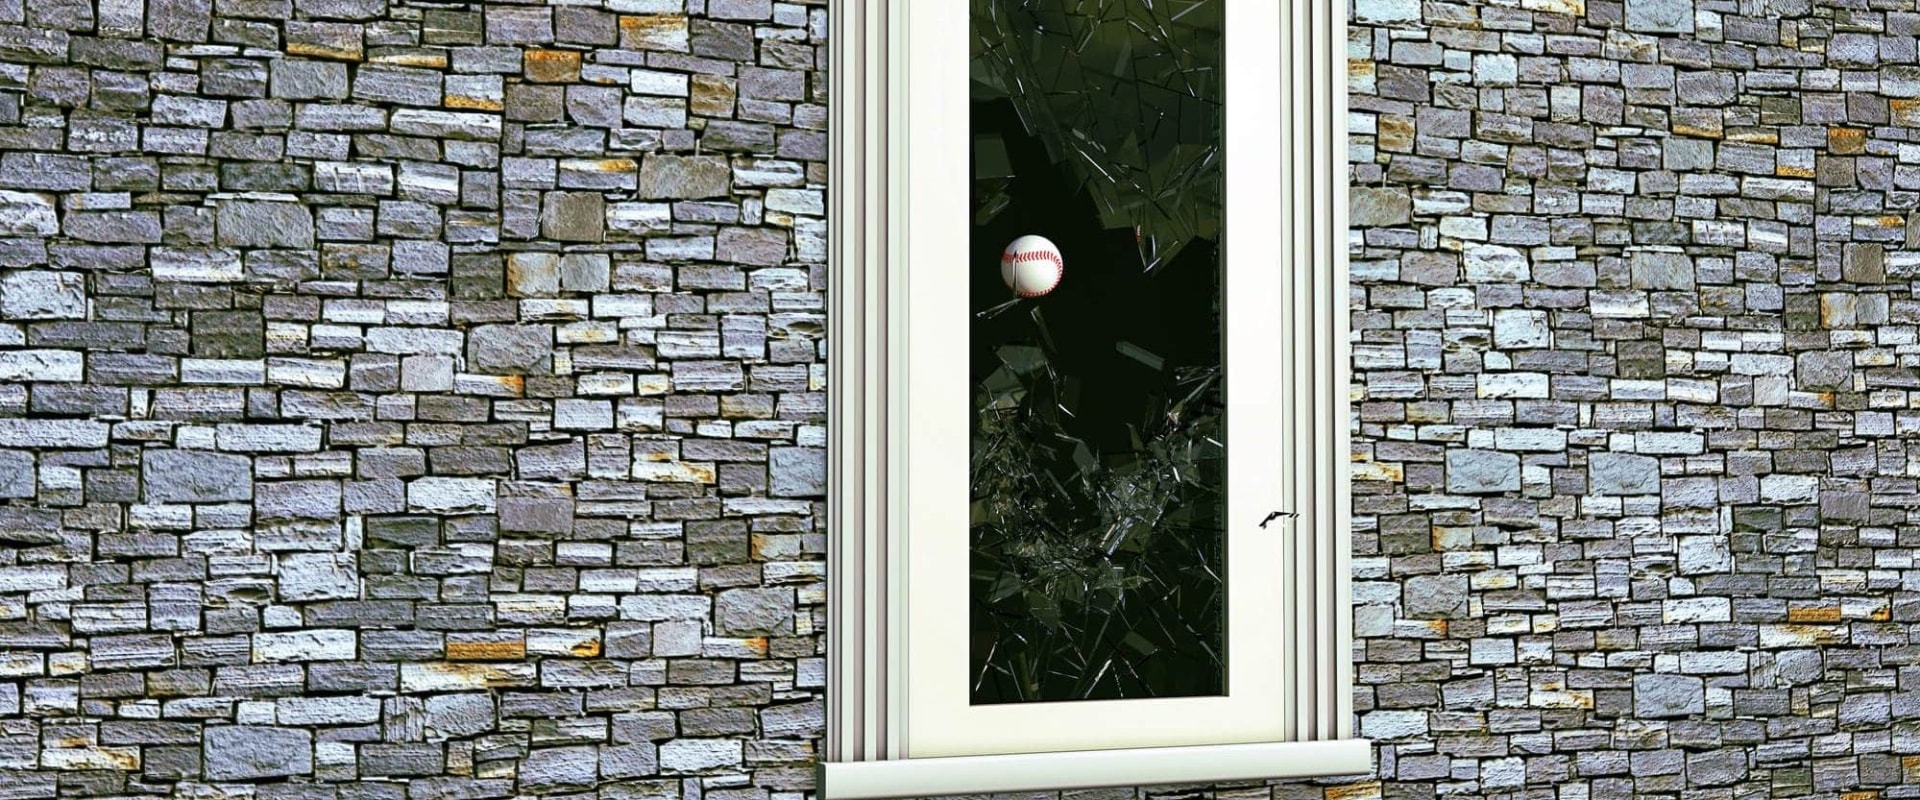 Will Home Insurance Cover Window Replacement?